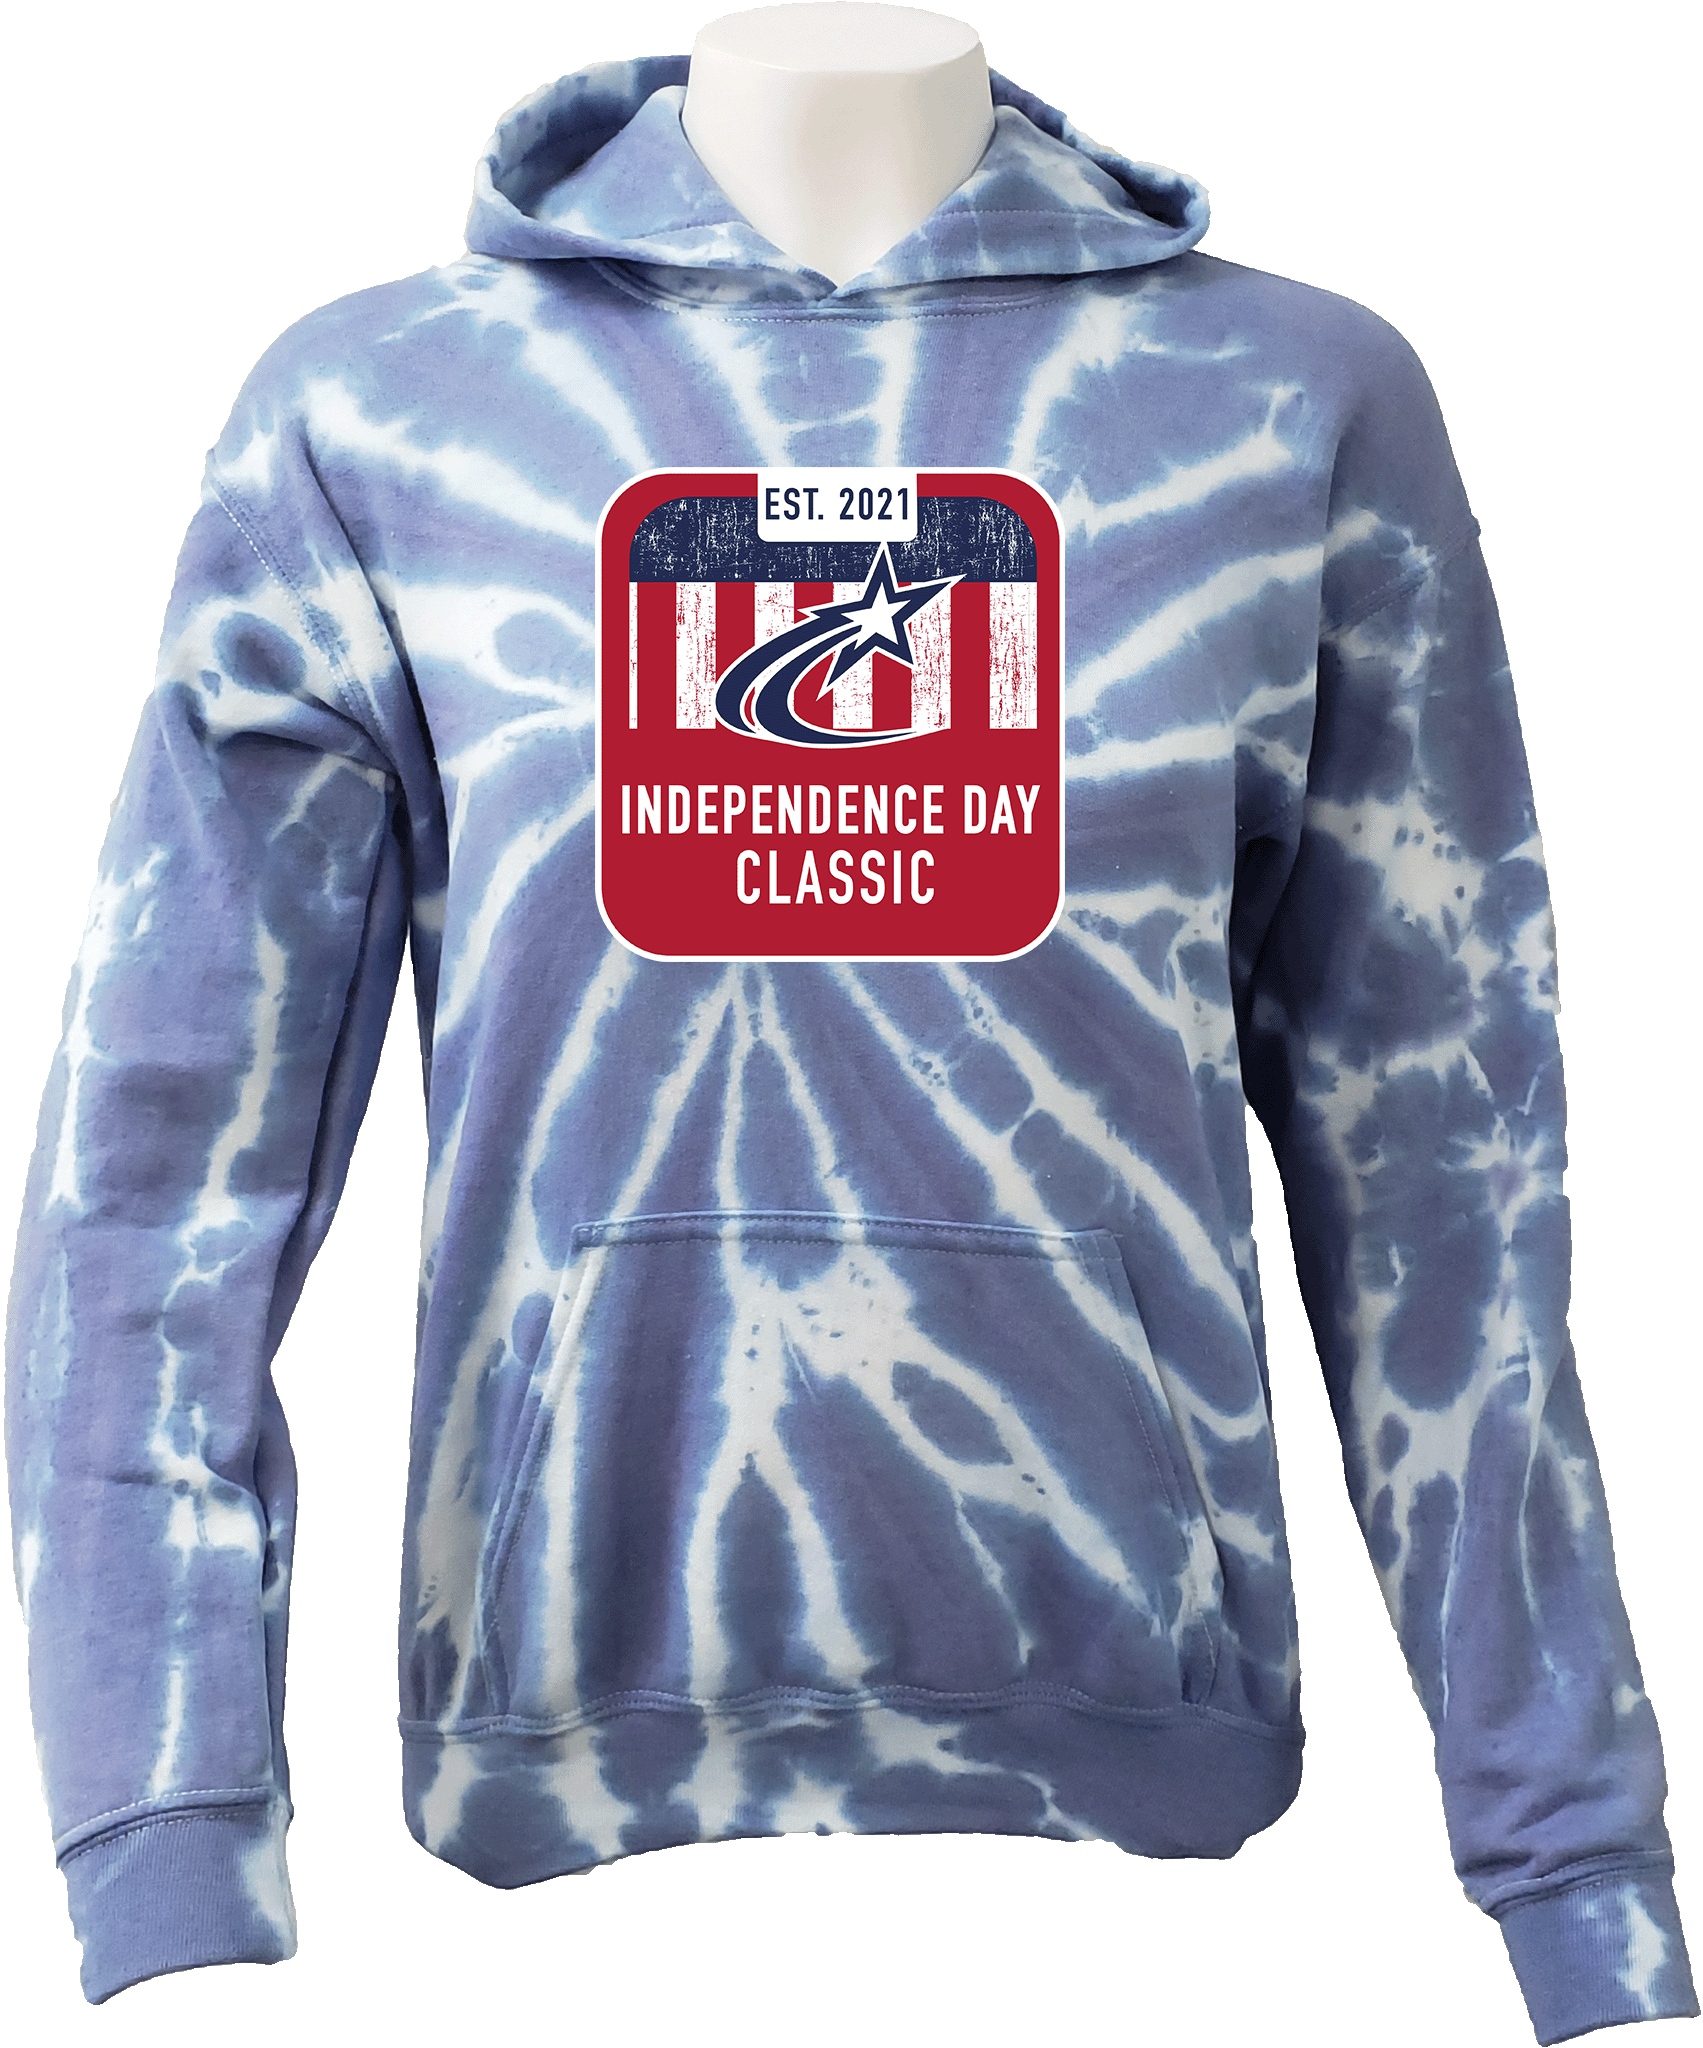 Tie-Dye Hoodies - 2023 Independence Day Classic